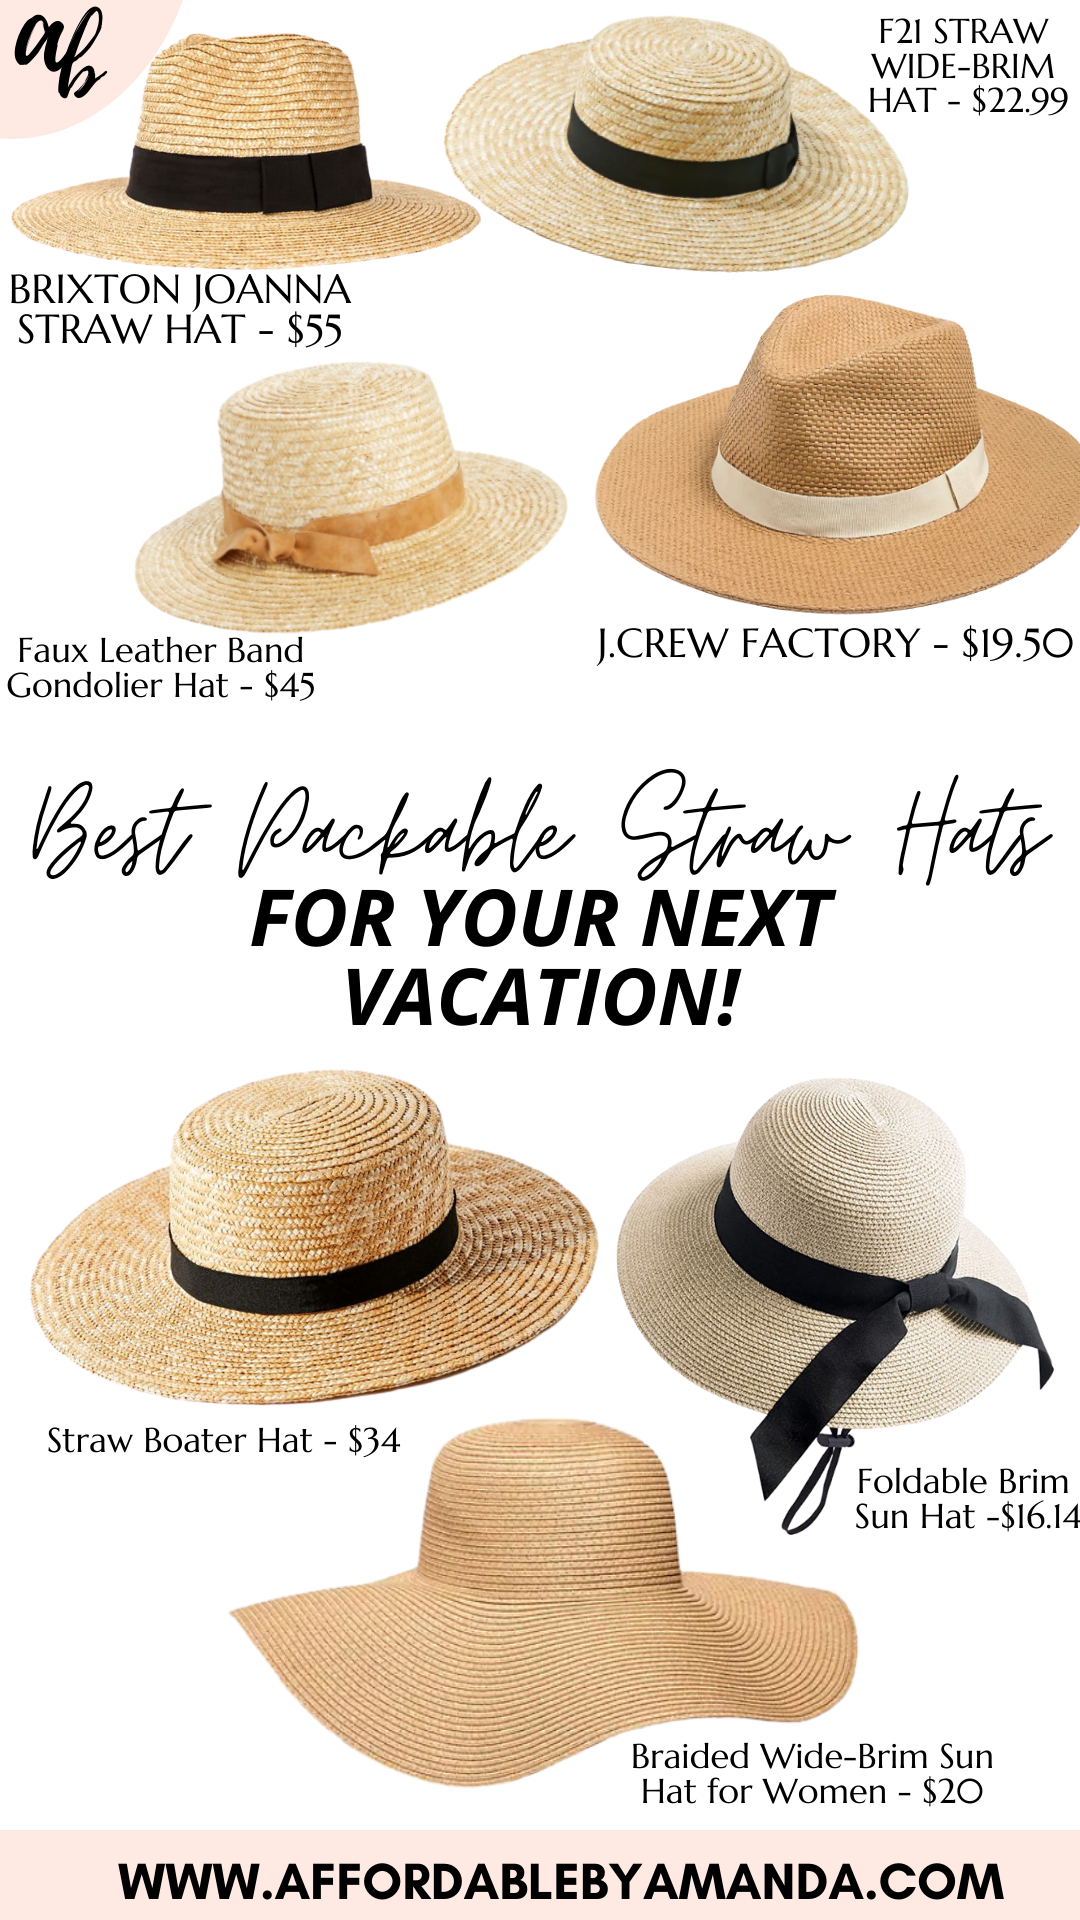 packable straw sun hats | best packable straw hats for your next vacation | affordable by amanda 